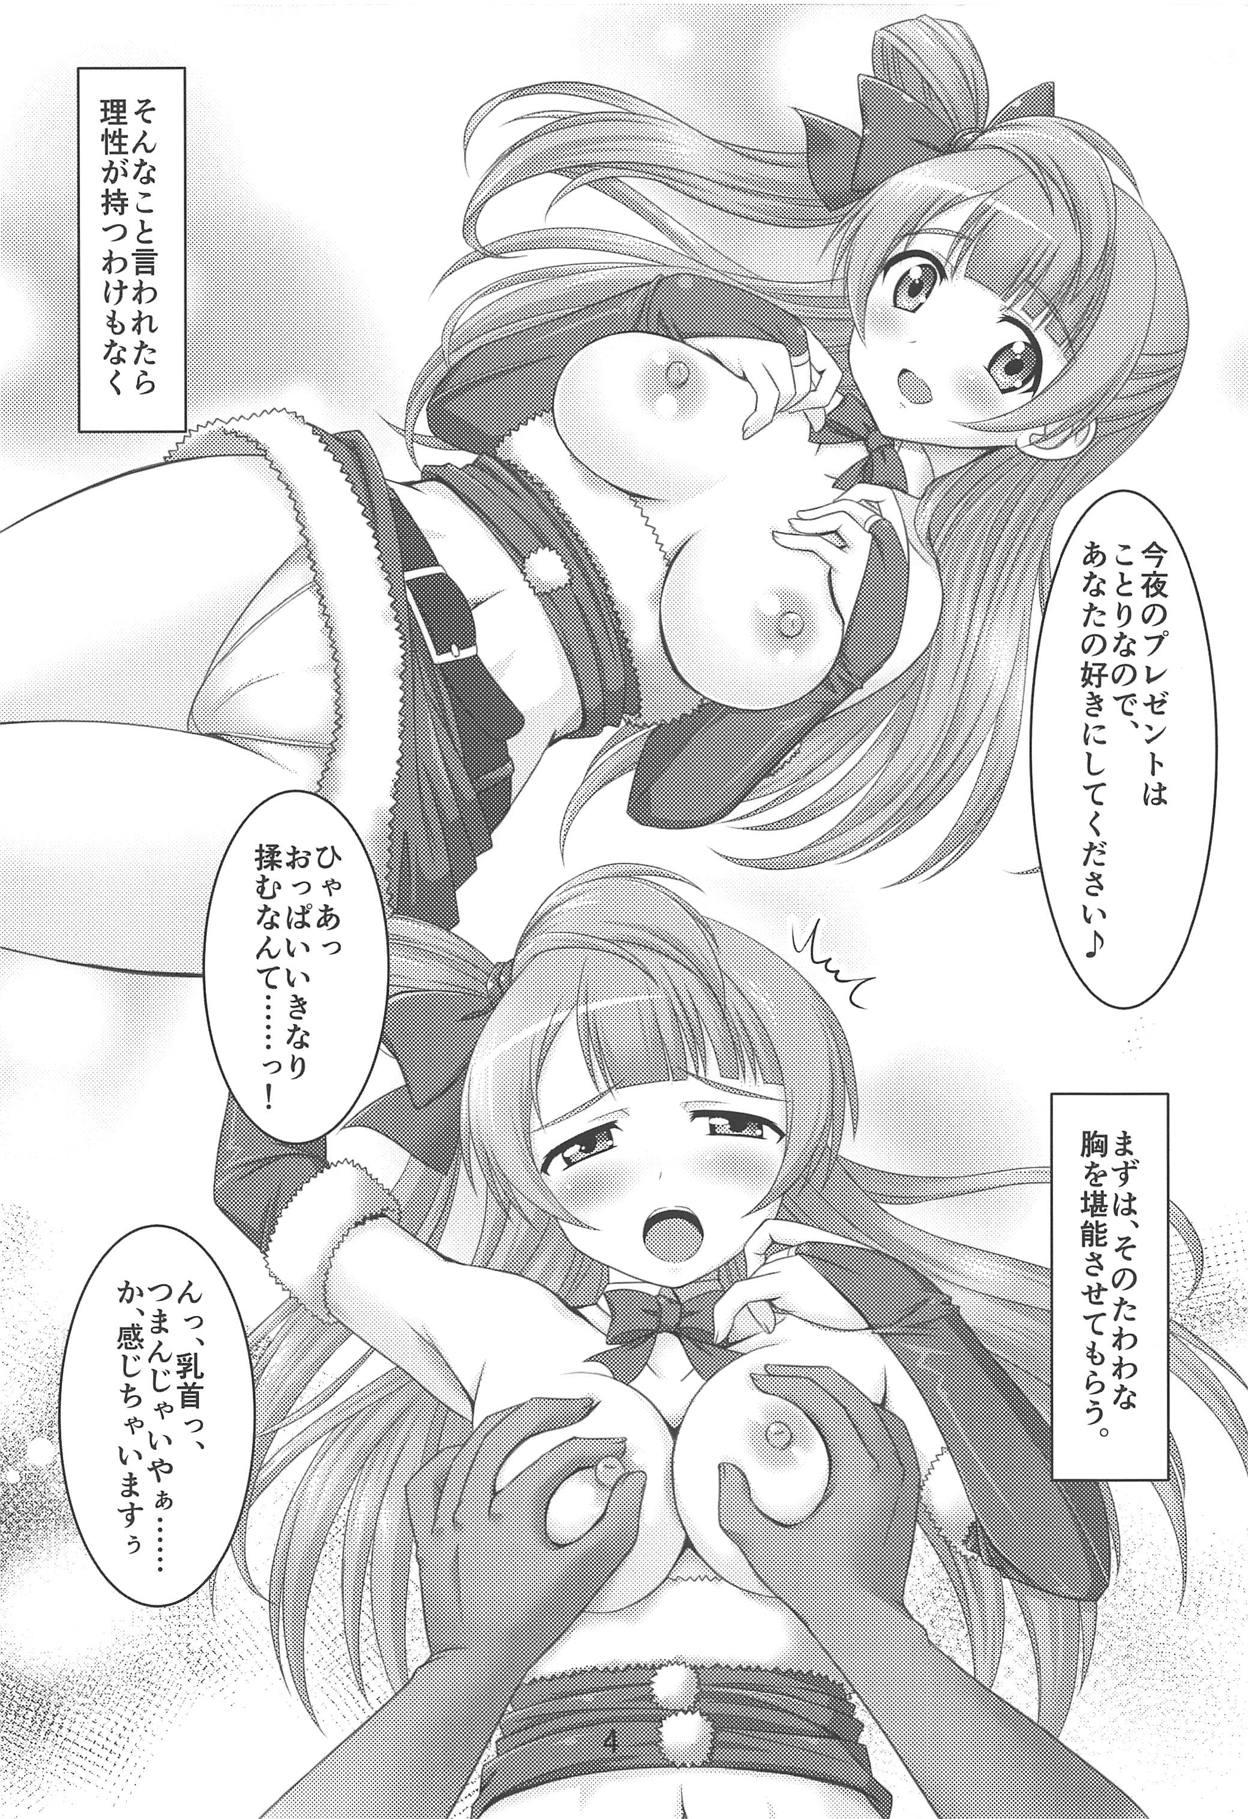 Pure18 Kotori to Asa made Issho 3 - Love live Amateur Asian - Page 3